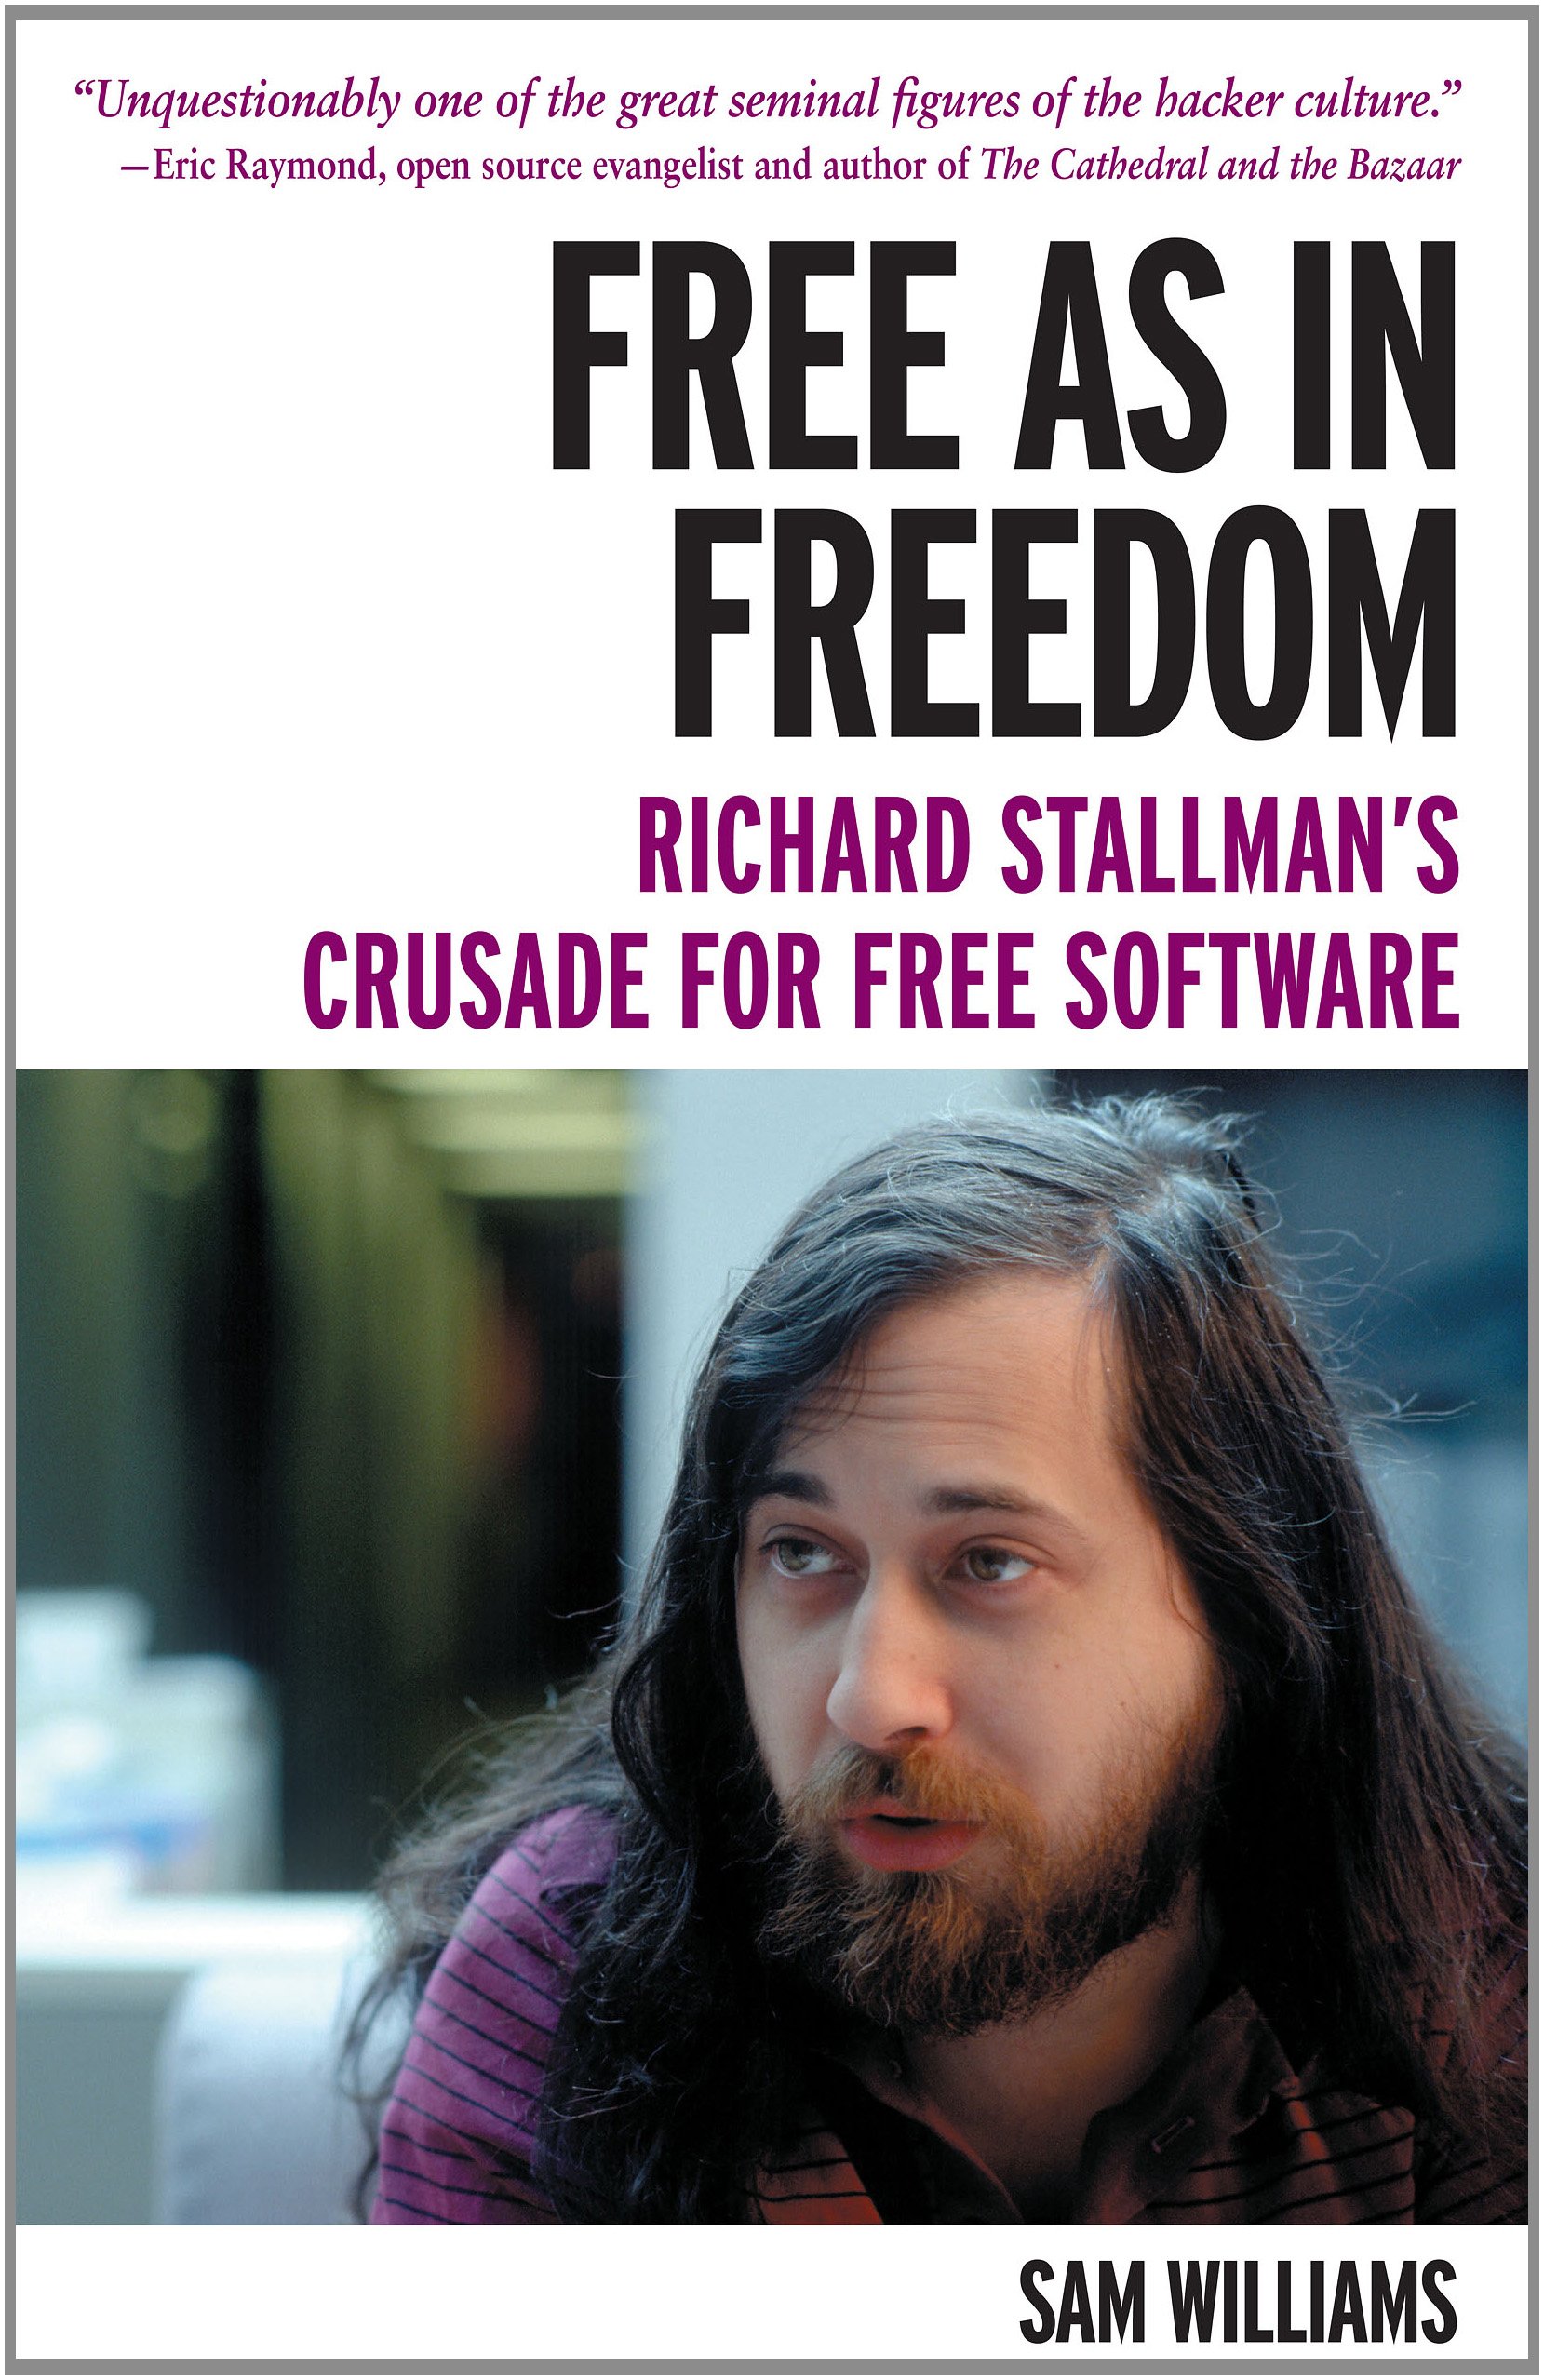 The Cover of Williams's book Free as in Freedom, a biography of Richard Stallman